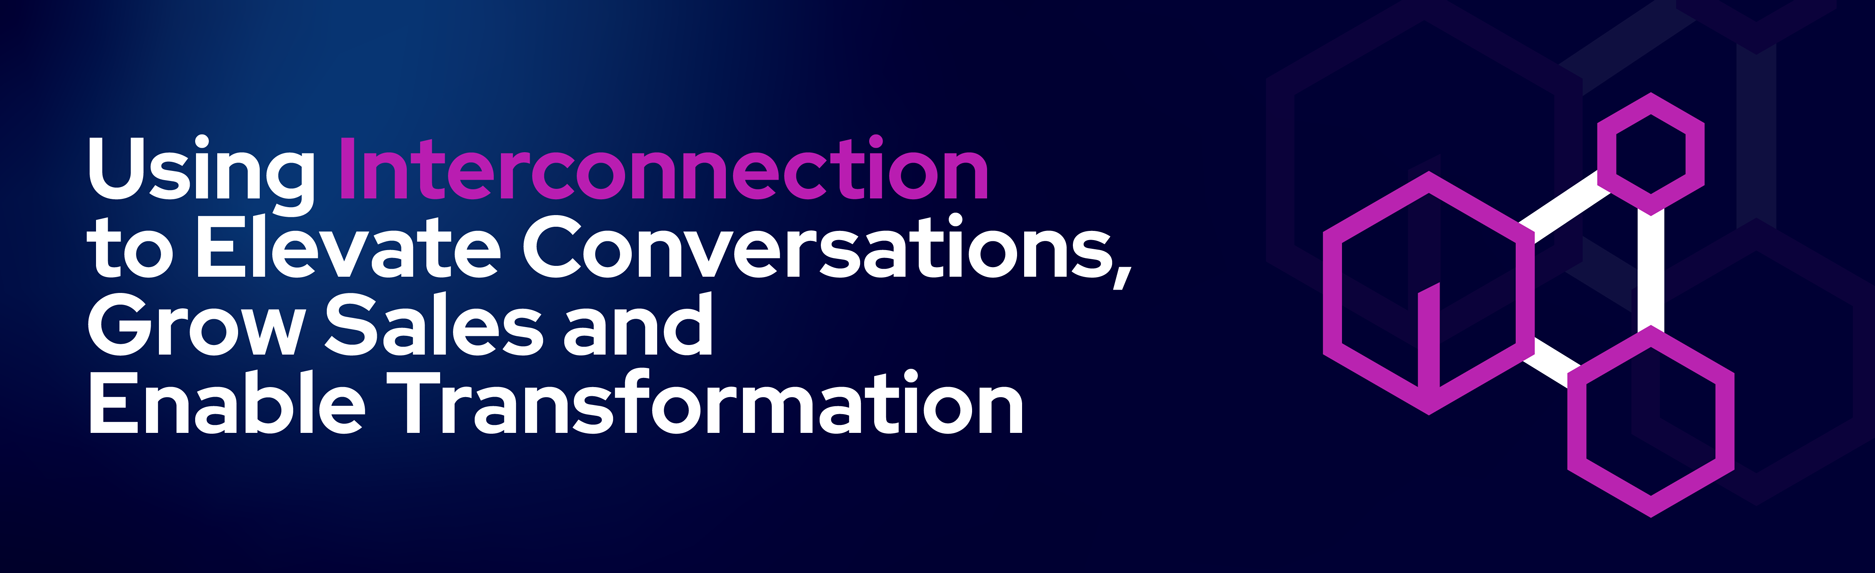 Using Interconnection to Elevate Conversations, Grow Sales, and Enable Transformation